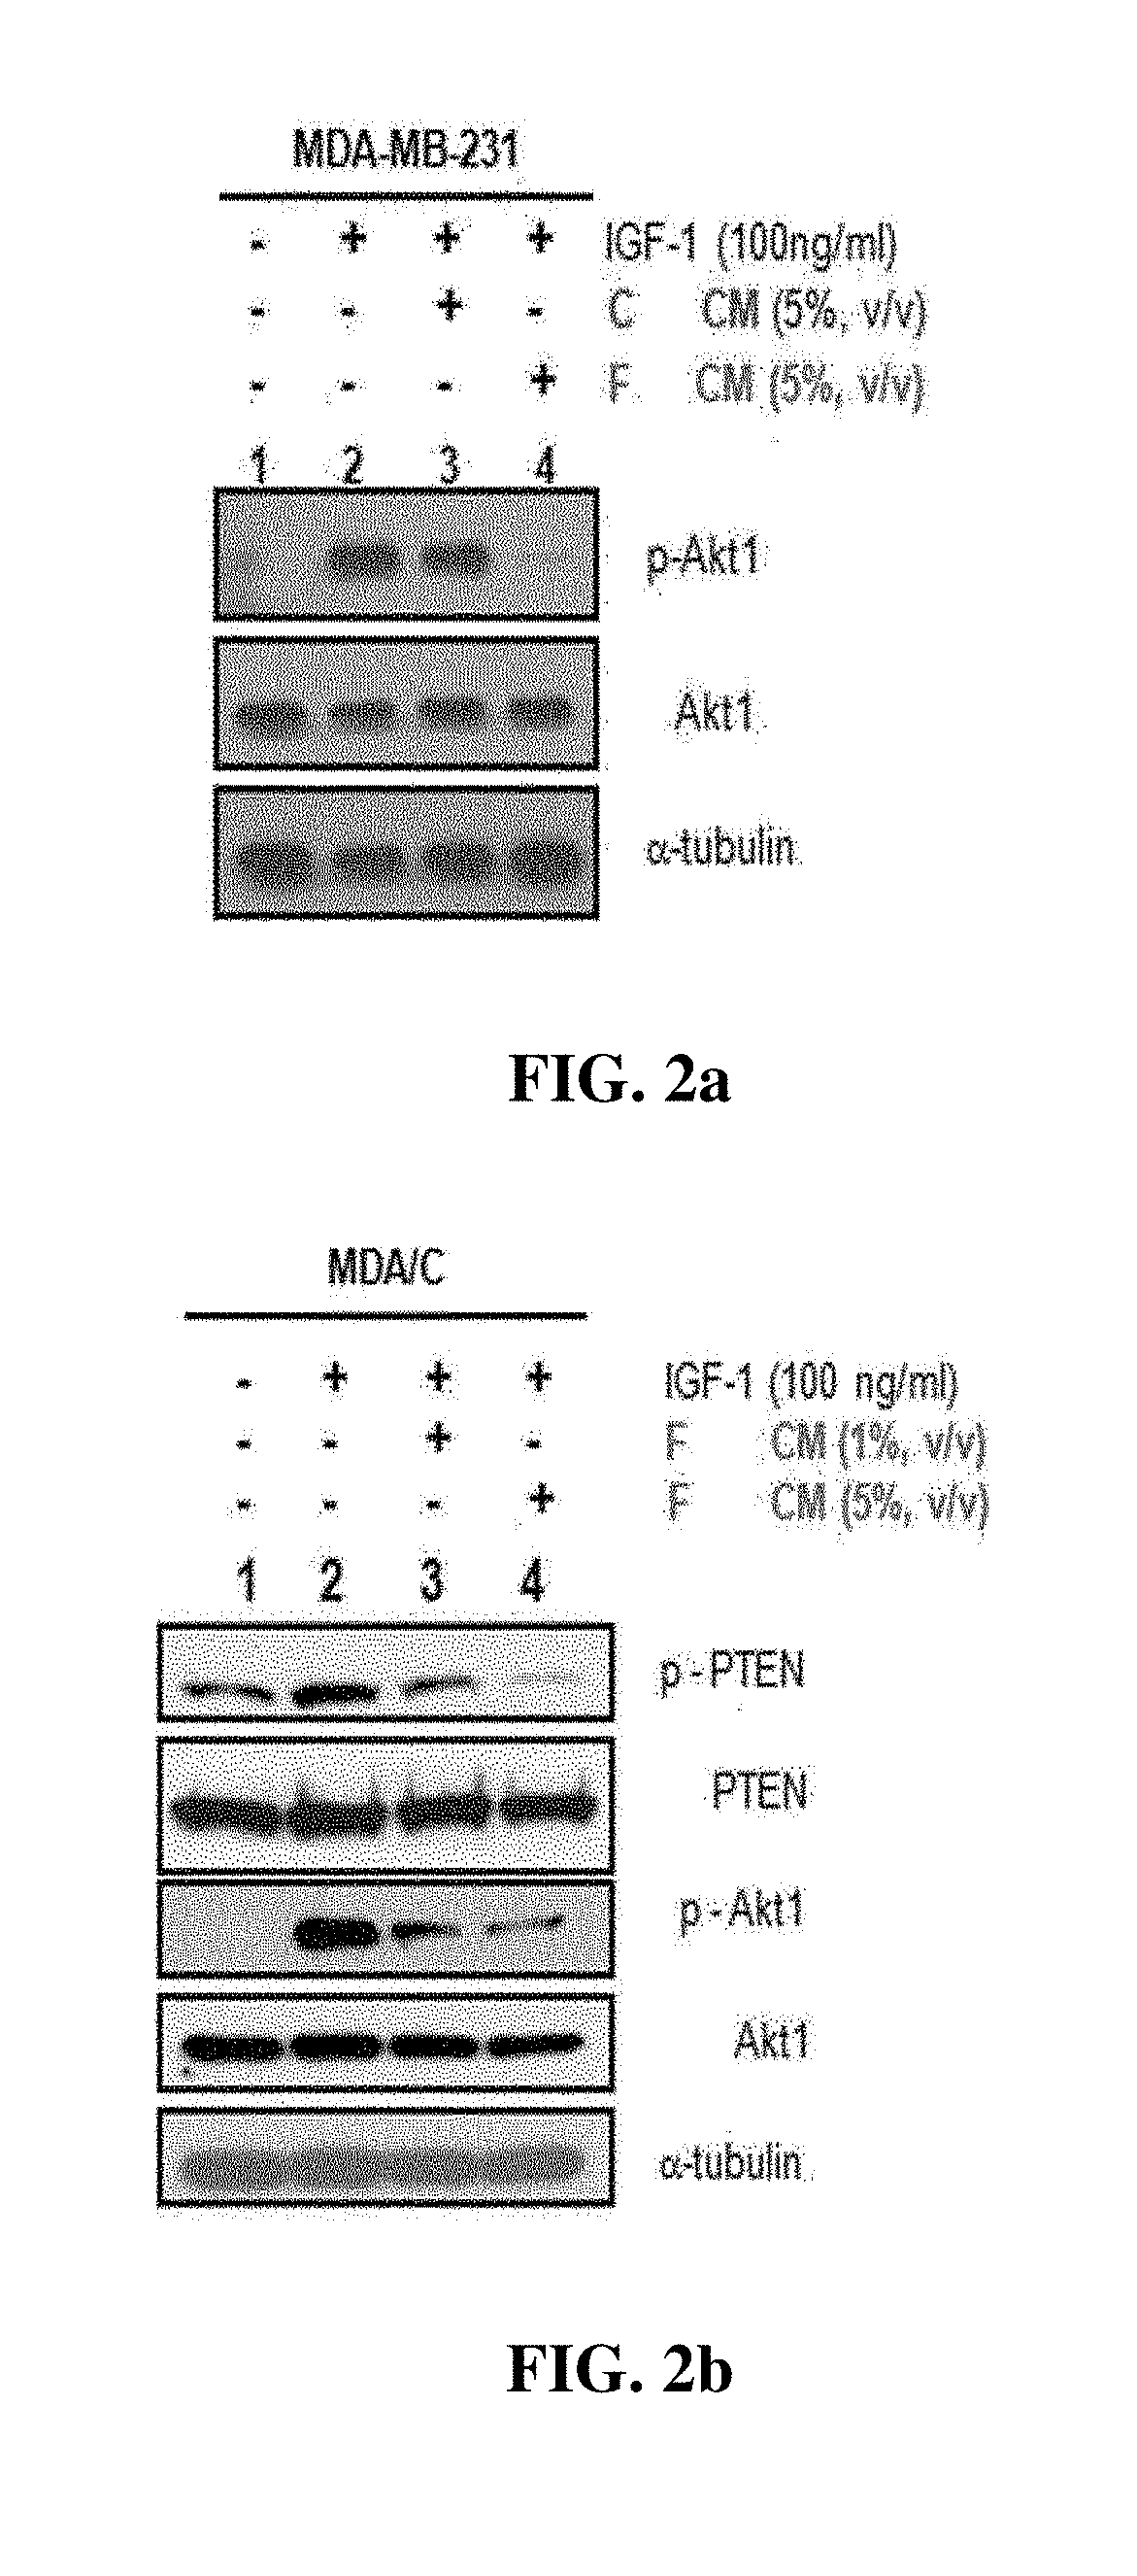 Pharmaceutical composition for preventing and treating cancer or cancer metastasis, containing fstl1 protein as active ingredient